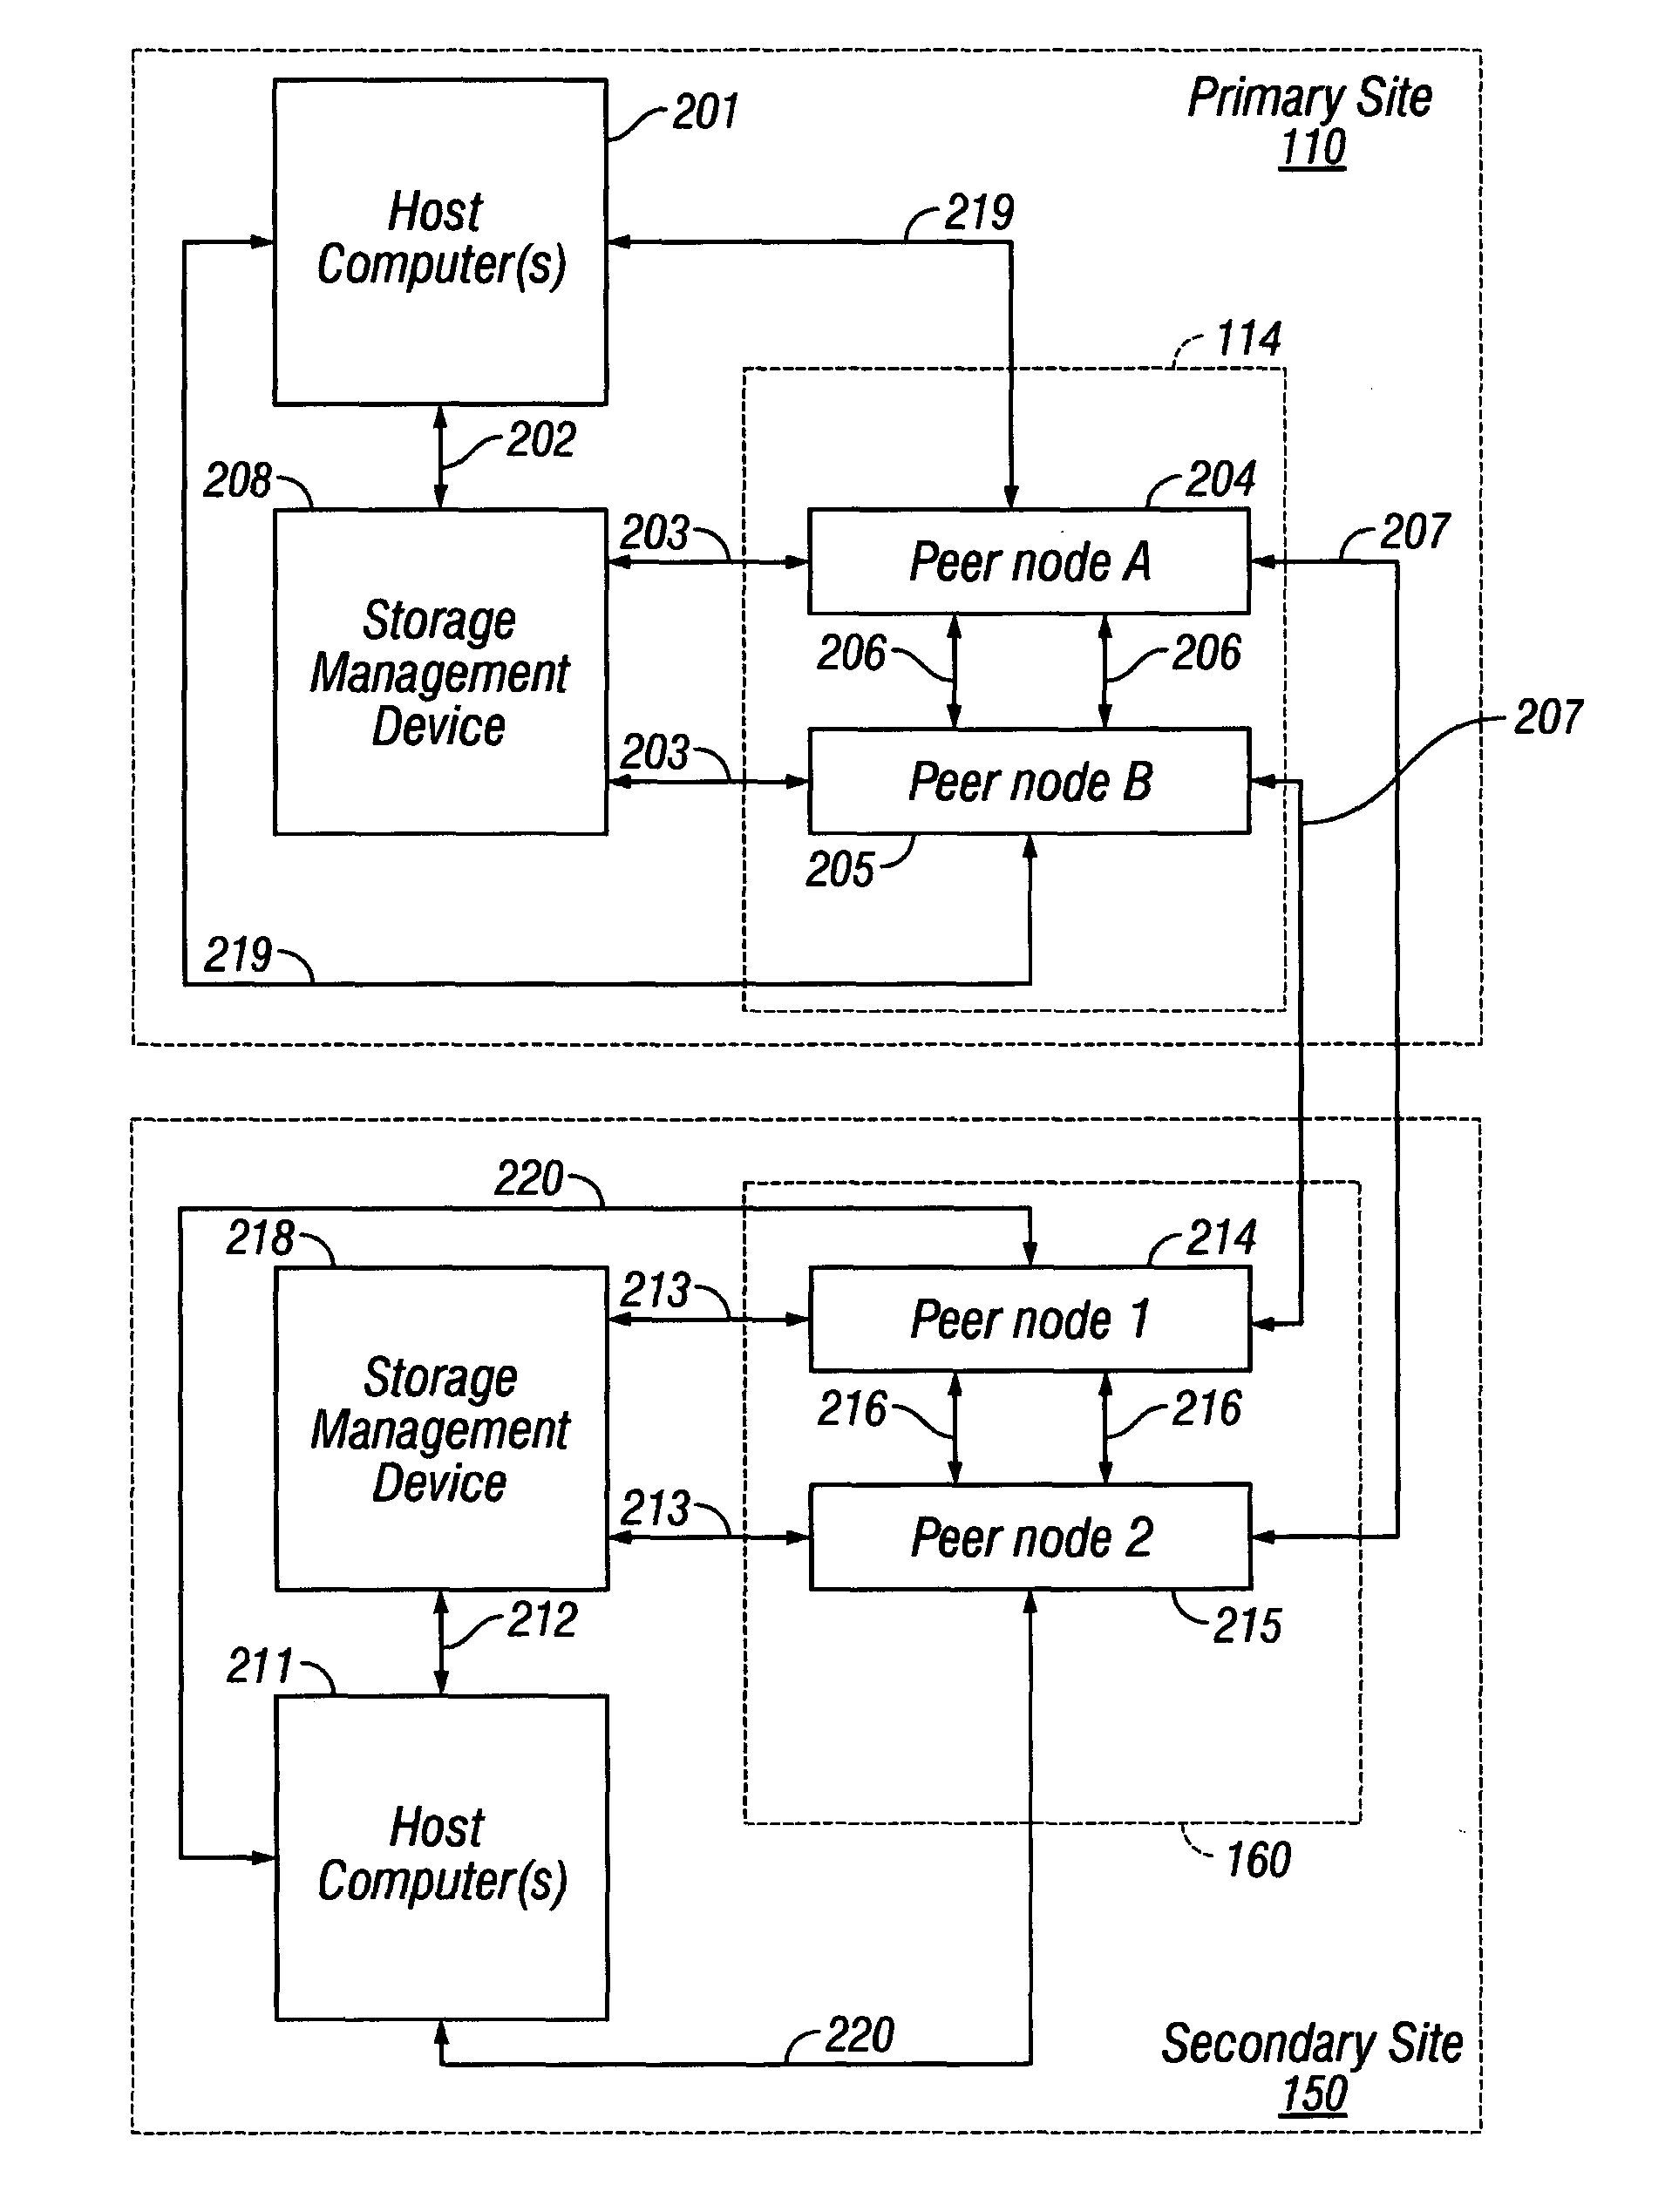 Autonomic predictive load balancing of output transfers for two peer computers for data storage applications